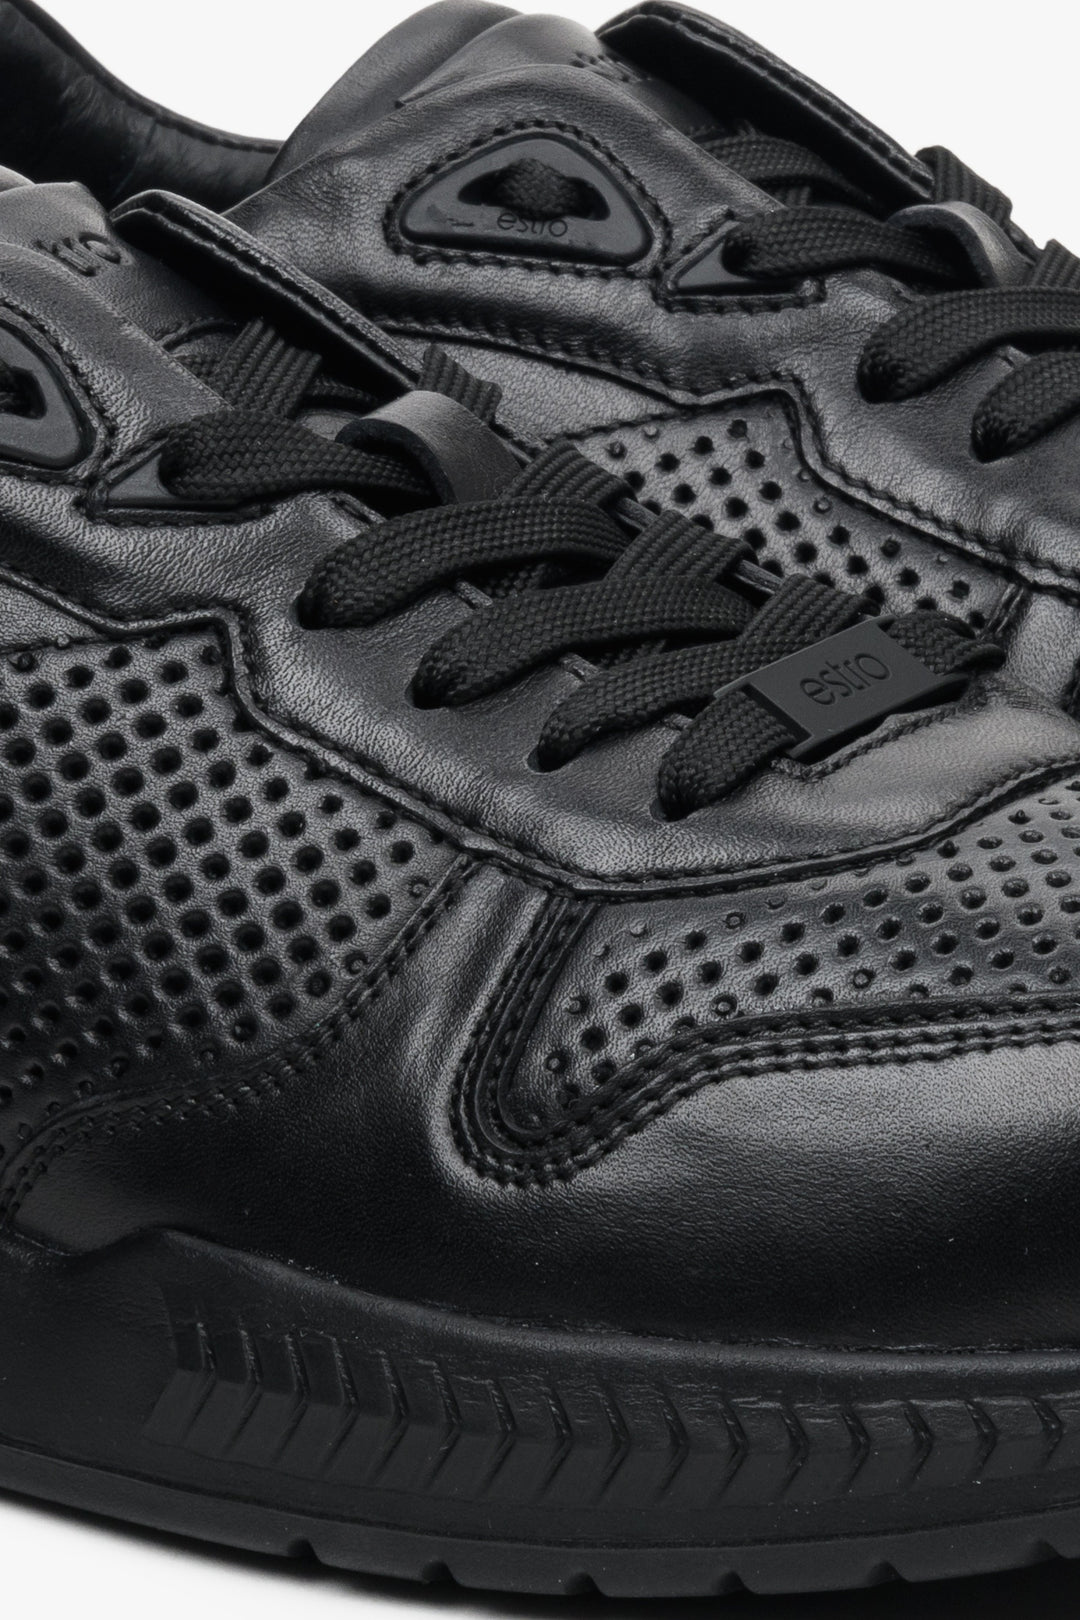 Men's black leather Estro sneakers with perforations - close-up on details.